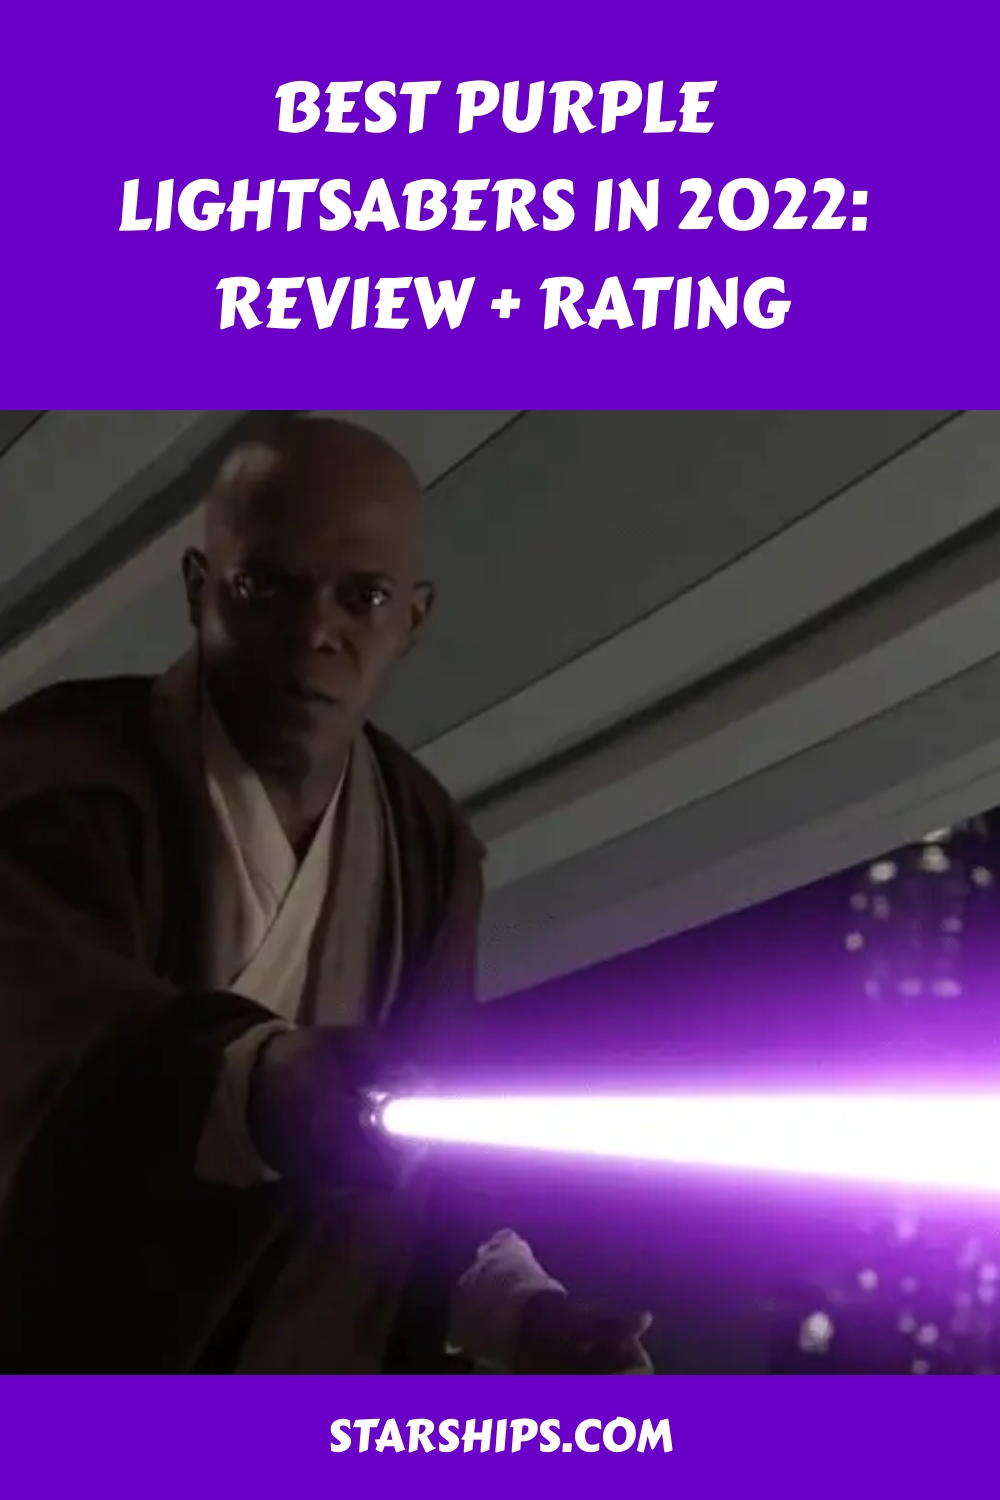 Best Purple Lightsabers in 2022 Review Rating generated pin 57441